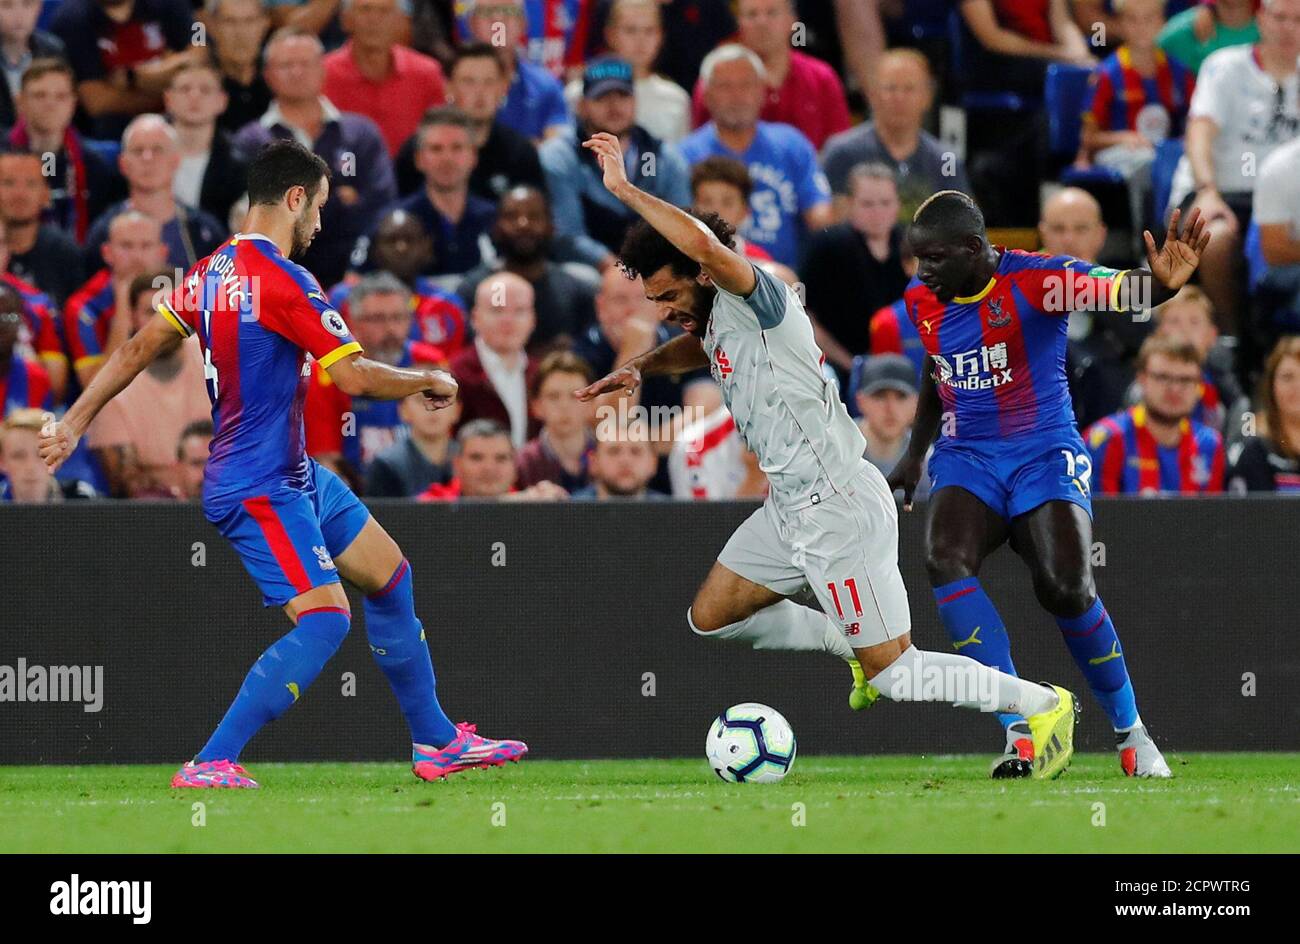 Soccer Football - Premier League - Crystal Palace v Liverpool - Selhurst Park, London, Britain - August 20, 2018  Crystal Palace's Mamadou Sakho concedes a penalty against Liverpool's Mohamed Salah                    REUTERS/Eddie Keogh  EDITORIAL USE ONLY. No use with unauthorized audio, video, data, fixture lists, club/league logos or 'live' services. Online in-match use limited to 75 images, no video emulation. No use in betting, games or single club/league/player publications.  Please contact your account representative for further details. Stock Photo